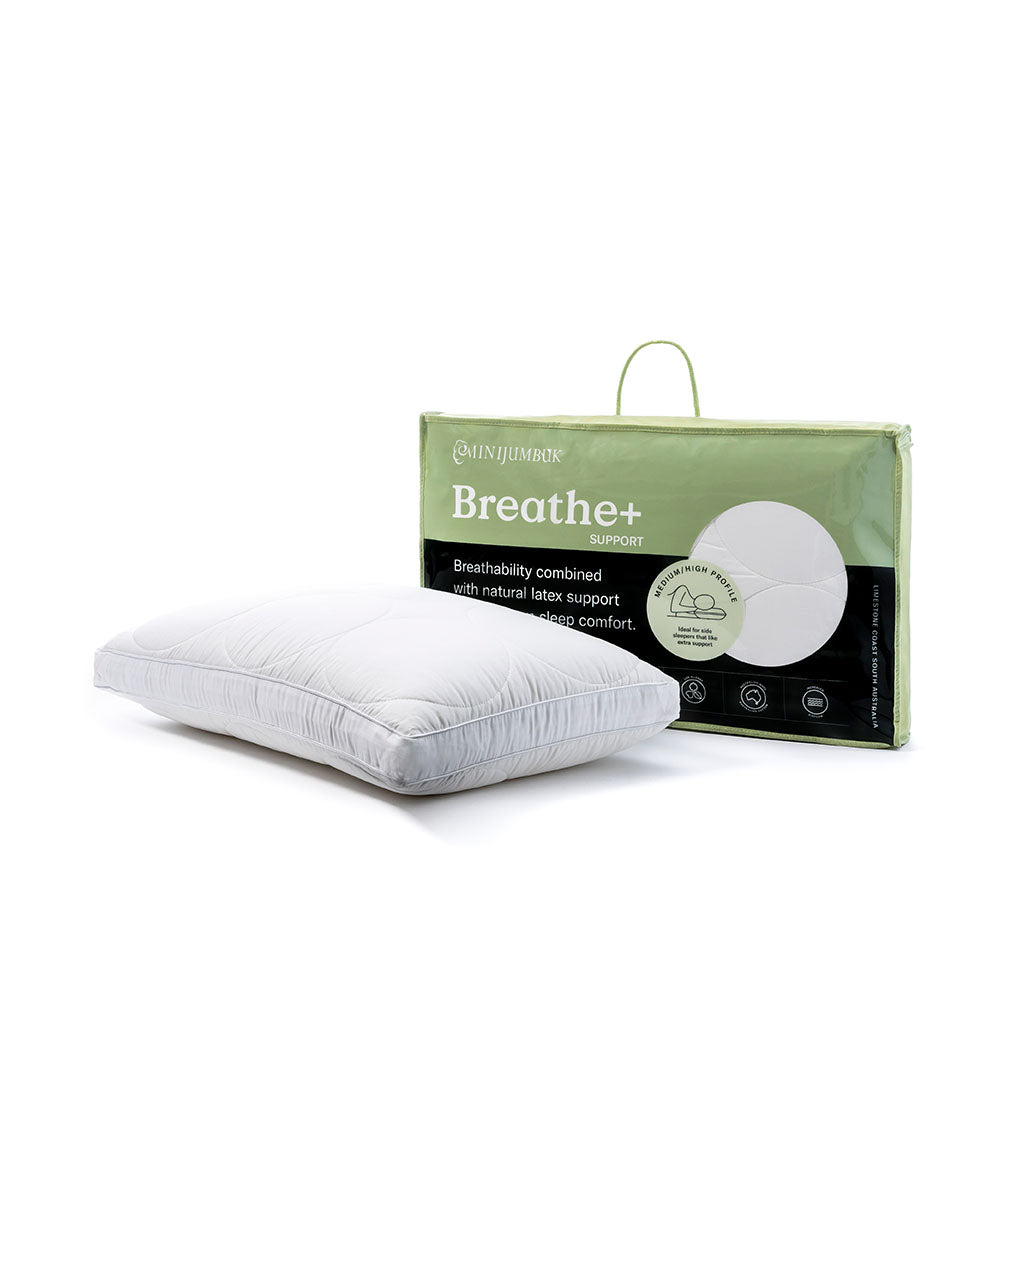 MiniJumbuk Breathe+ SUPPORT Wool Cotton Quilted Pillow